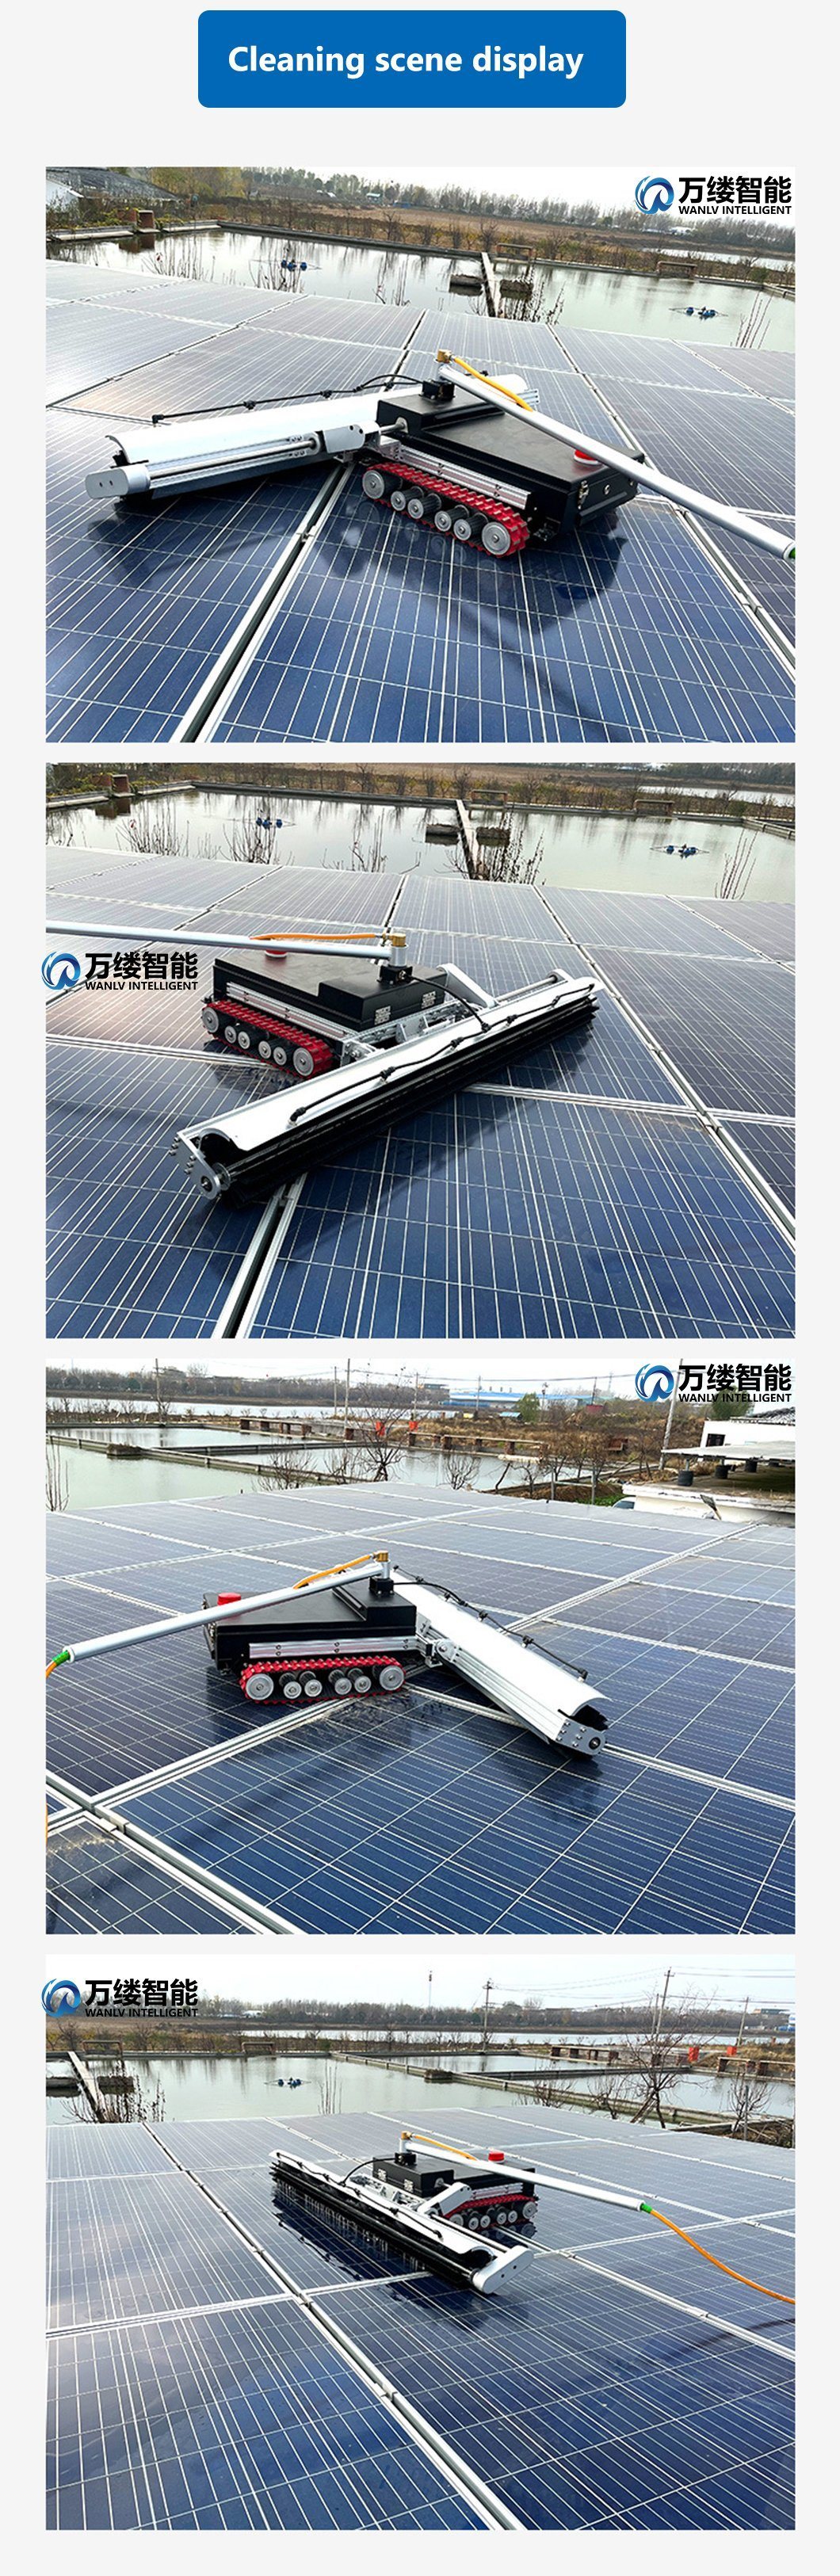 7.5m Solar Panel Cleaning Robot for Sale Solar Panel Cleaning Brush Telescopic Water Fed Pole Solar